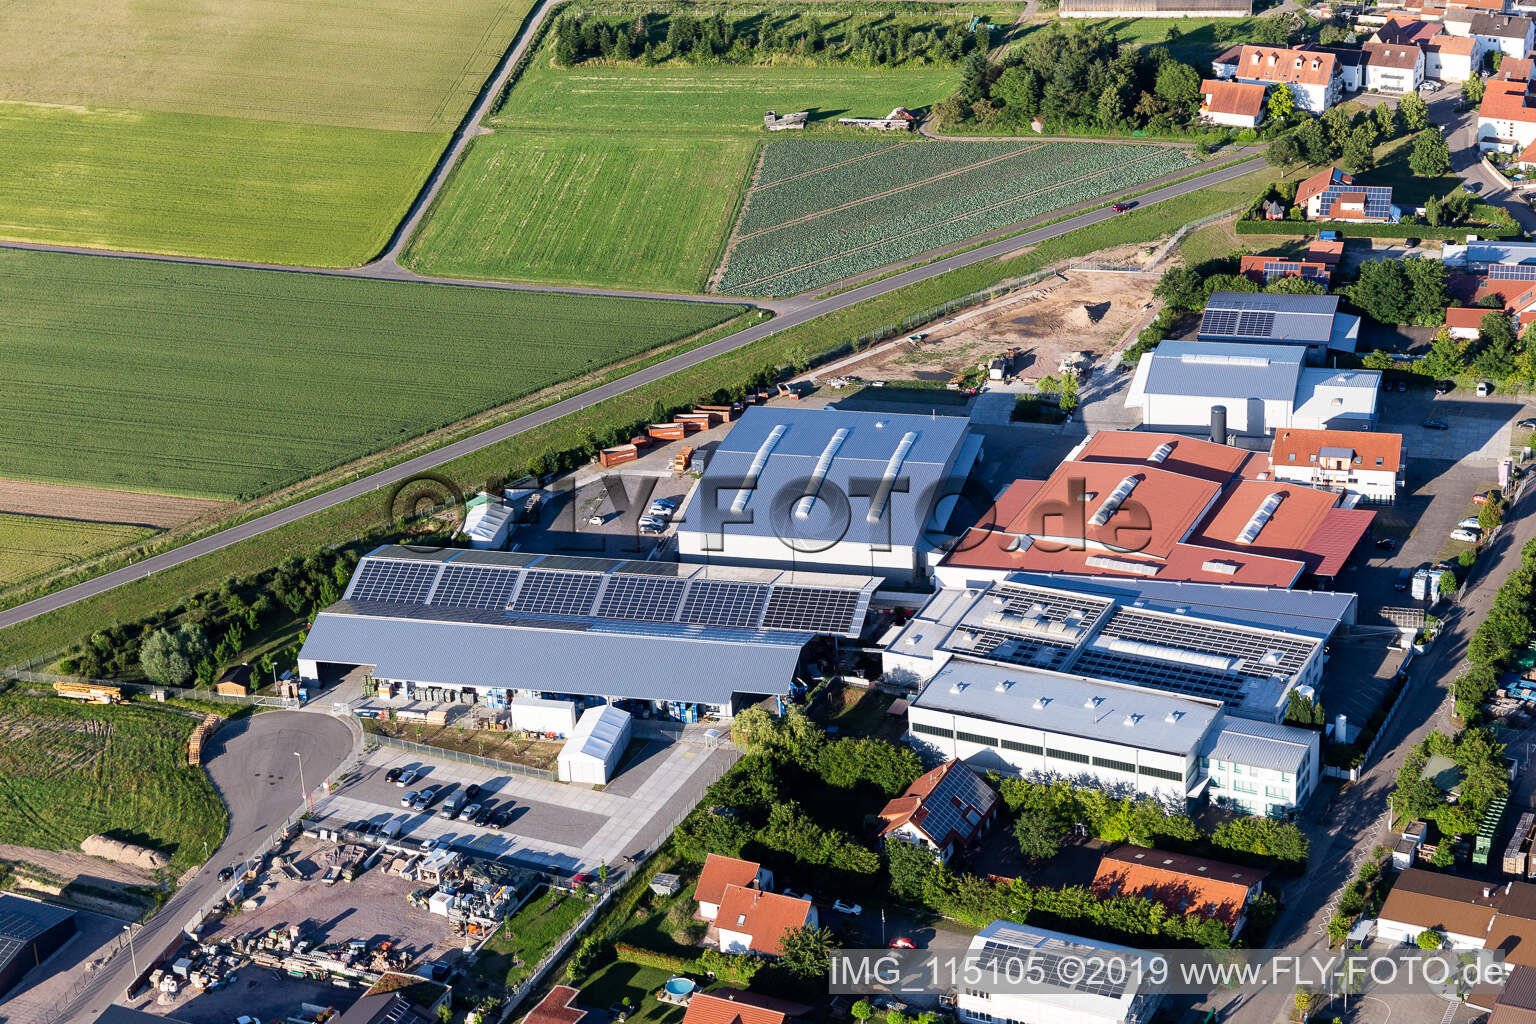 Aerial photograpy of Commercial area Im Gereut, HGGS LaserCUT GmbH & Co. KG in Hatzenbühl in the state Rhineland-Palatinate, Germany